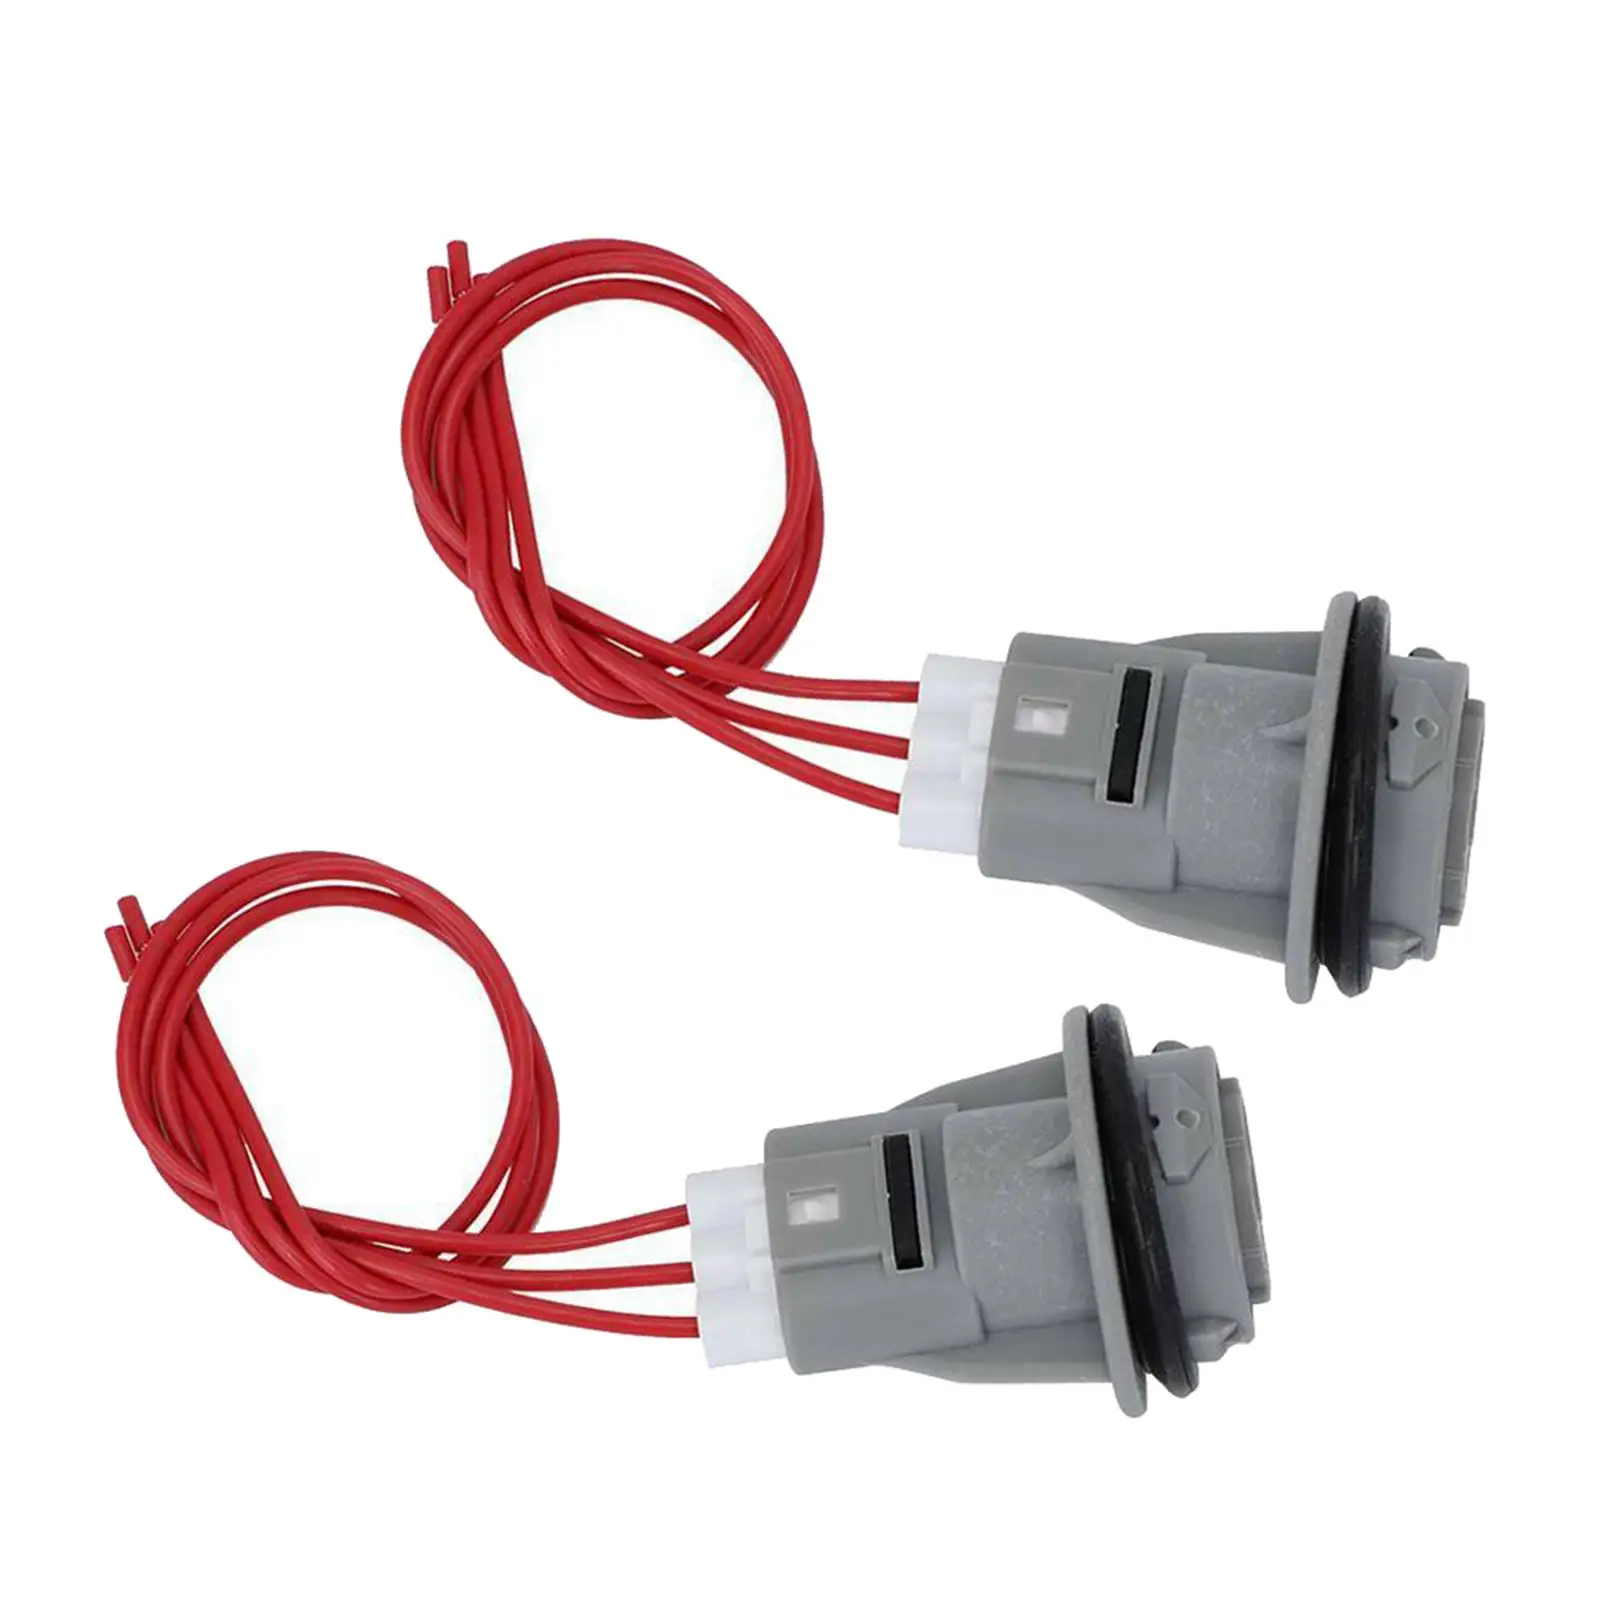 1 Pair Front Turn Signal Blinker Light Bulb Socket & Connector Harness 33302-Sr3-A01 Kit 3-Wire for Honda Acura Accord